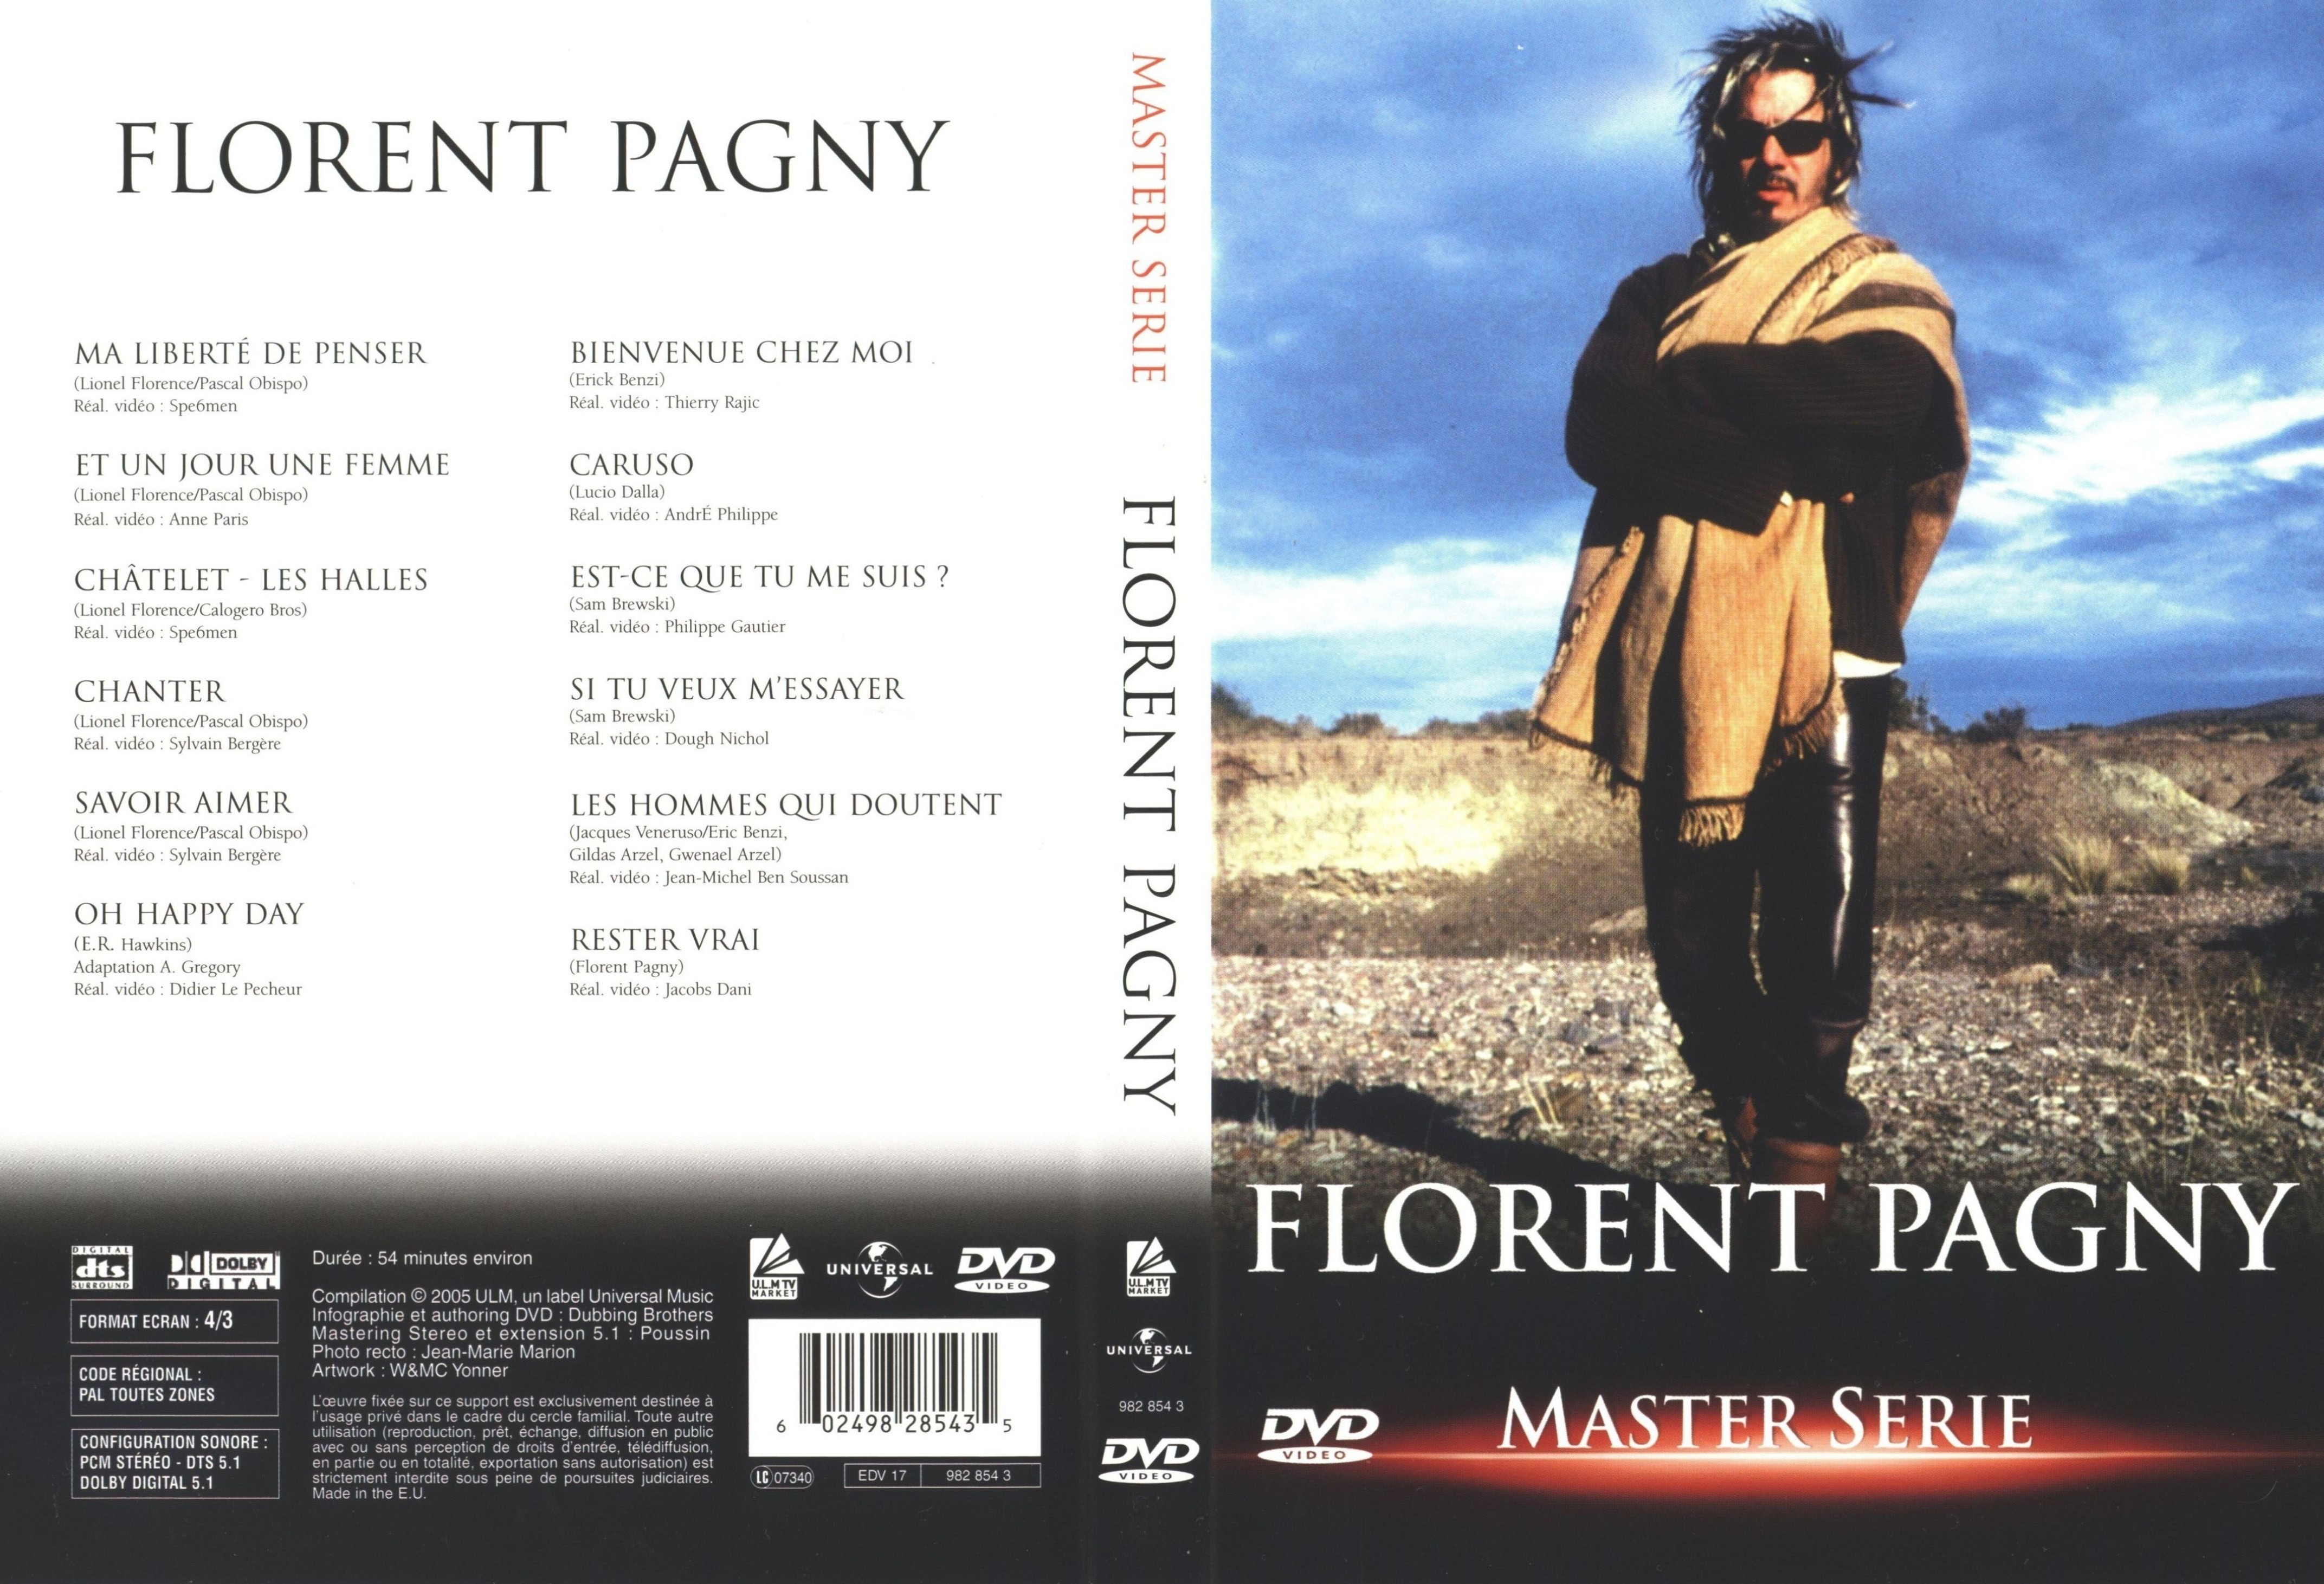 Jaquette DVD Florent Pagny Master Serie